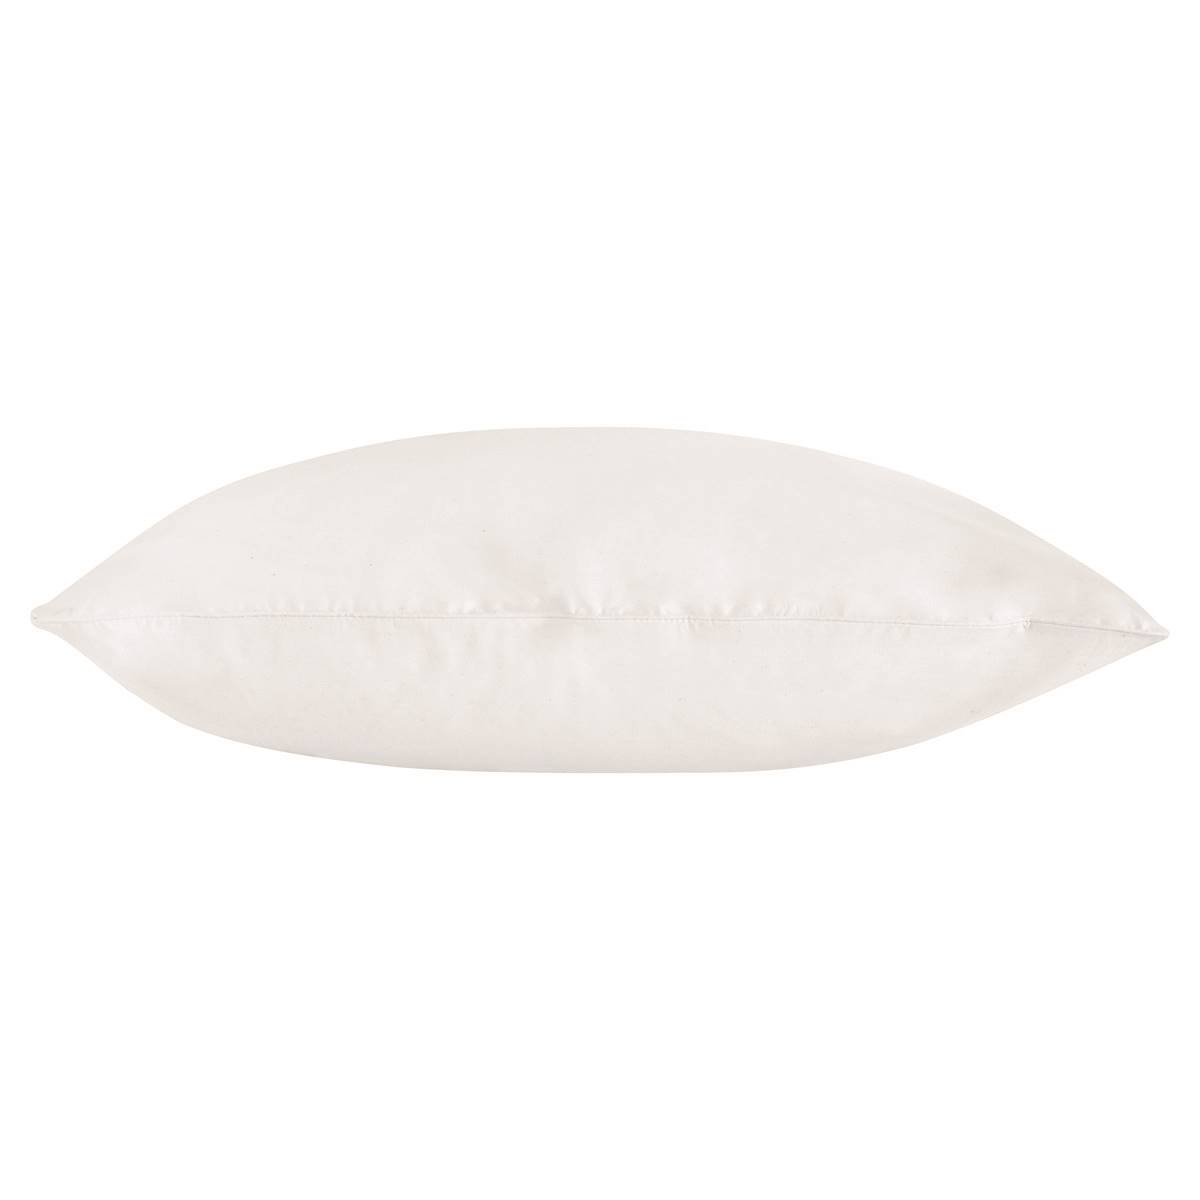 Sealy(R) All Positions Pillow